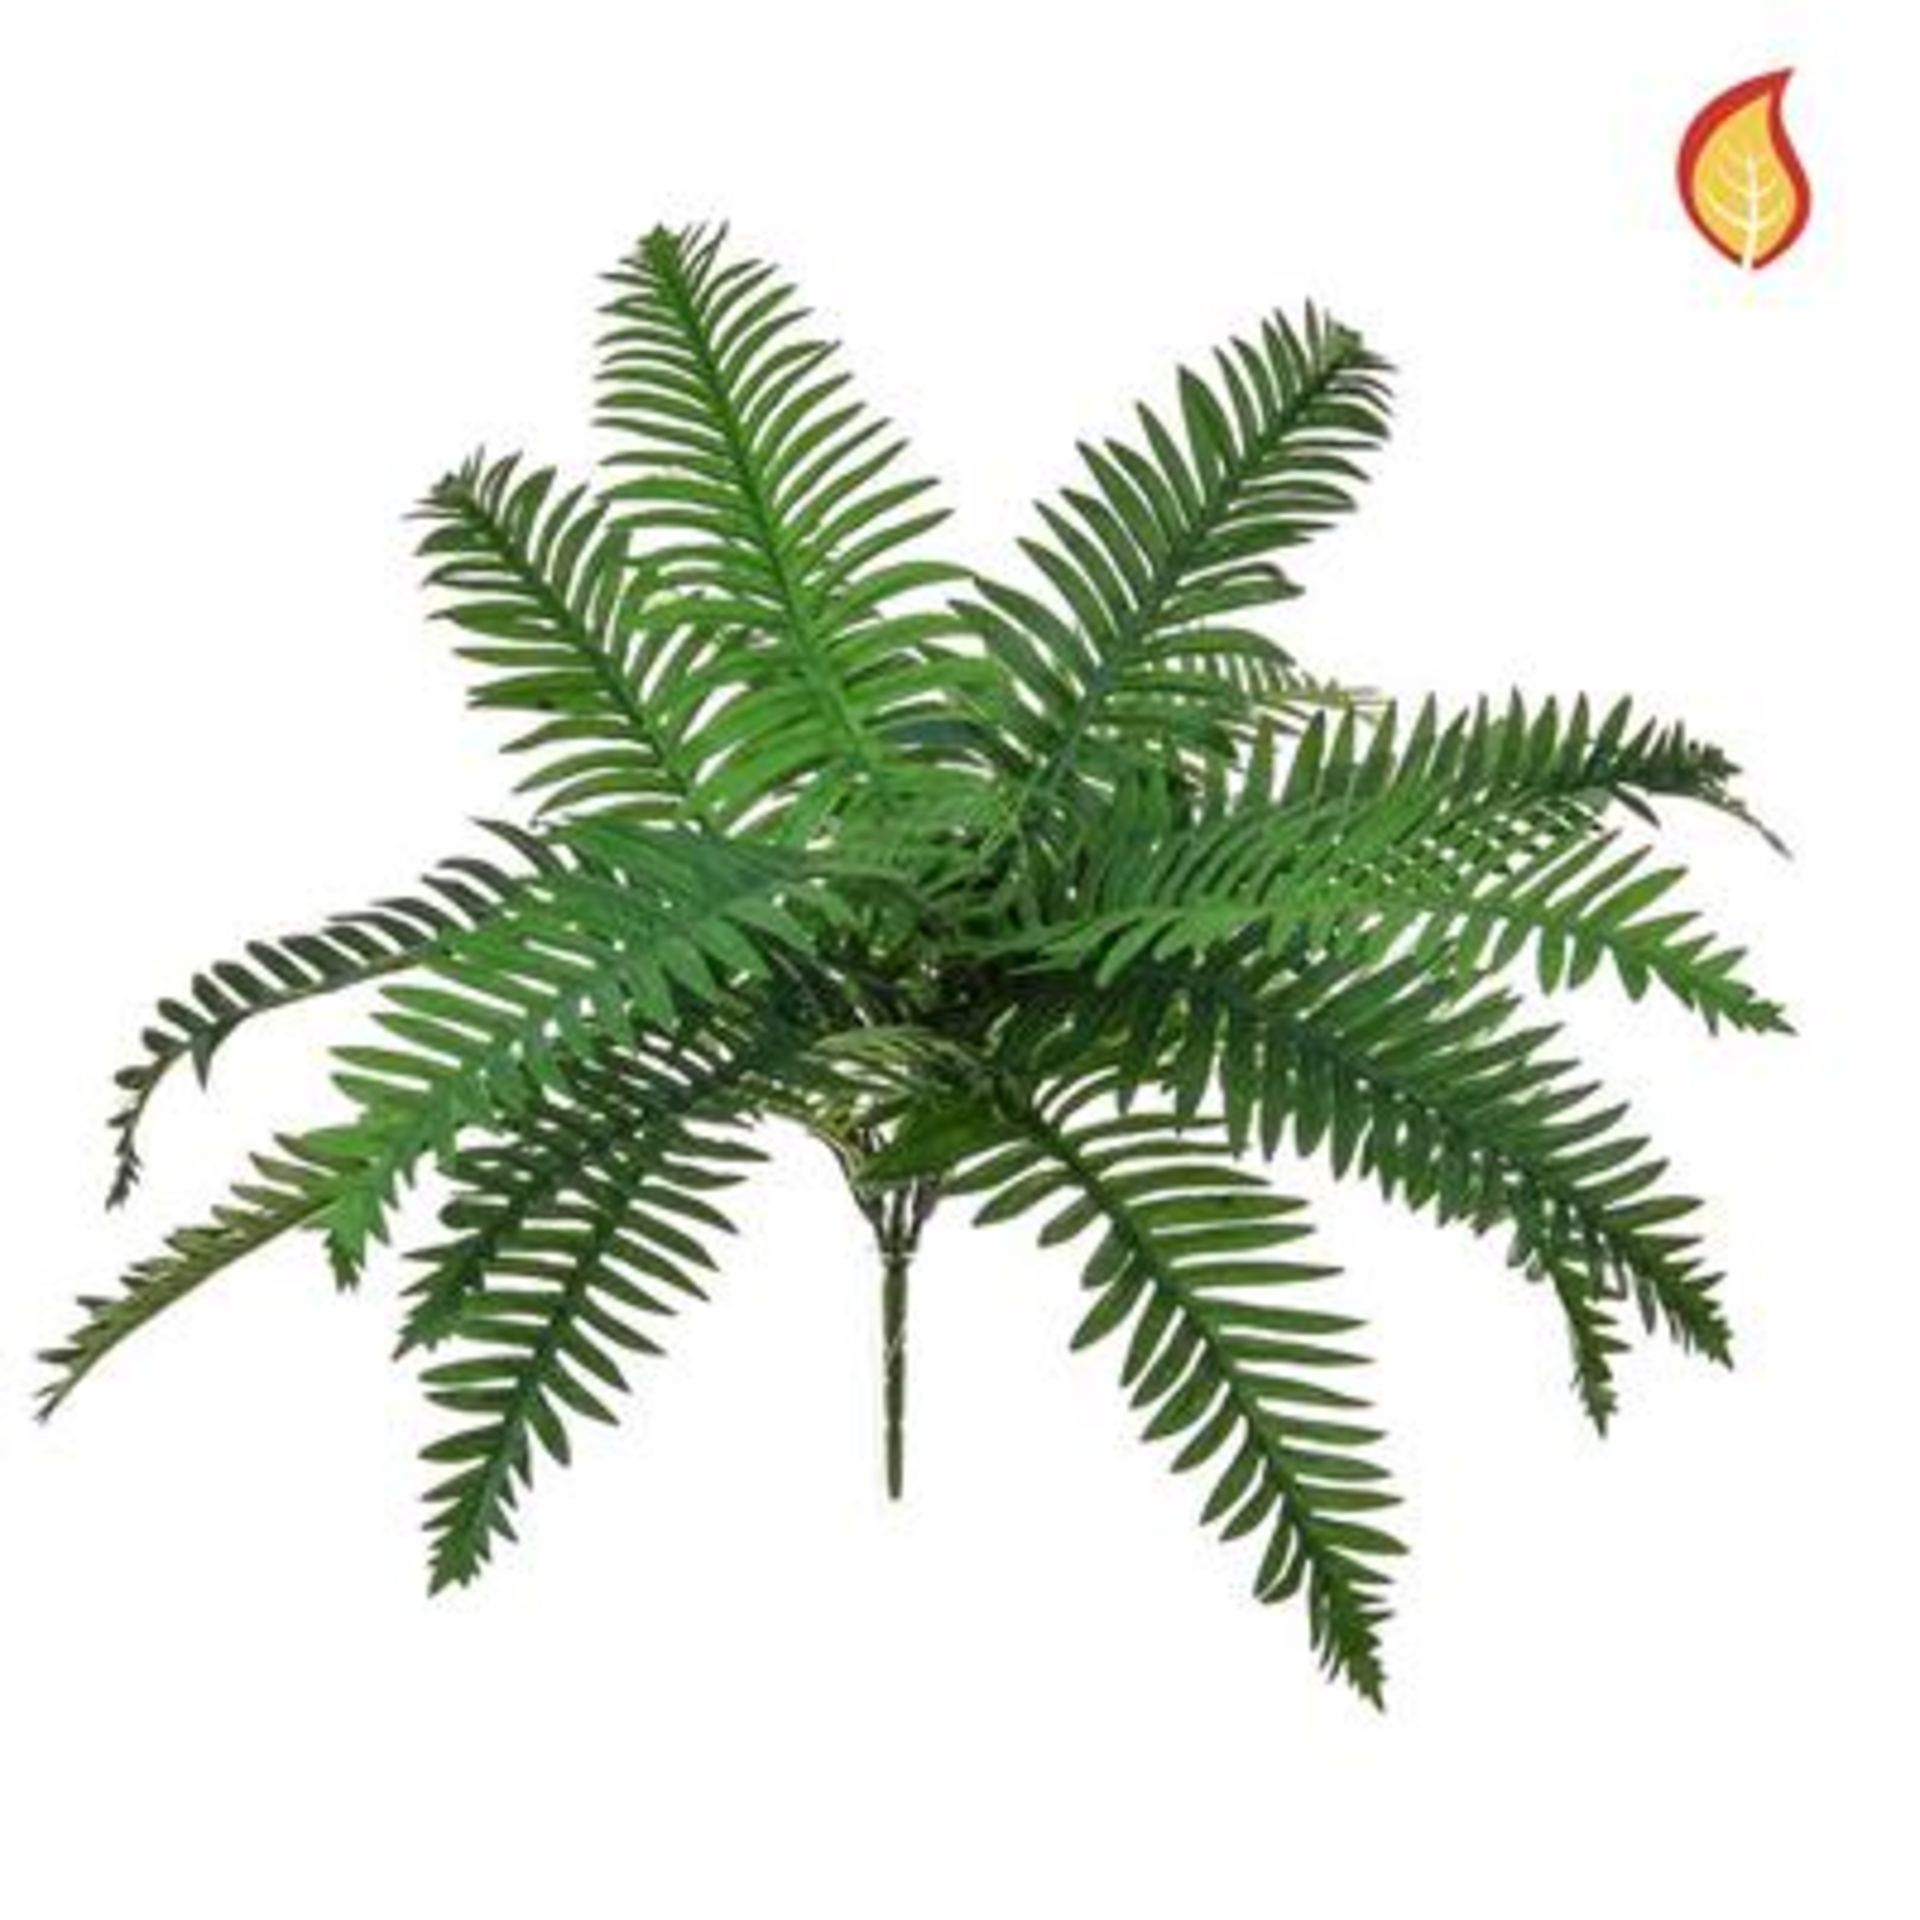 5 x Artificial River Fern FR - New and unused - Image 3 of 3